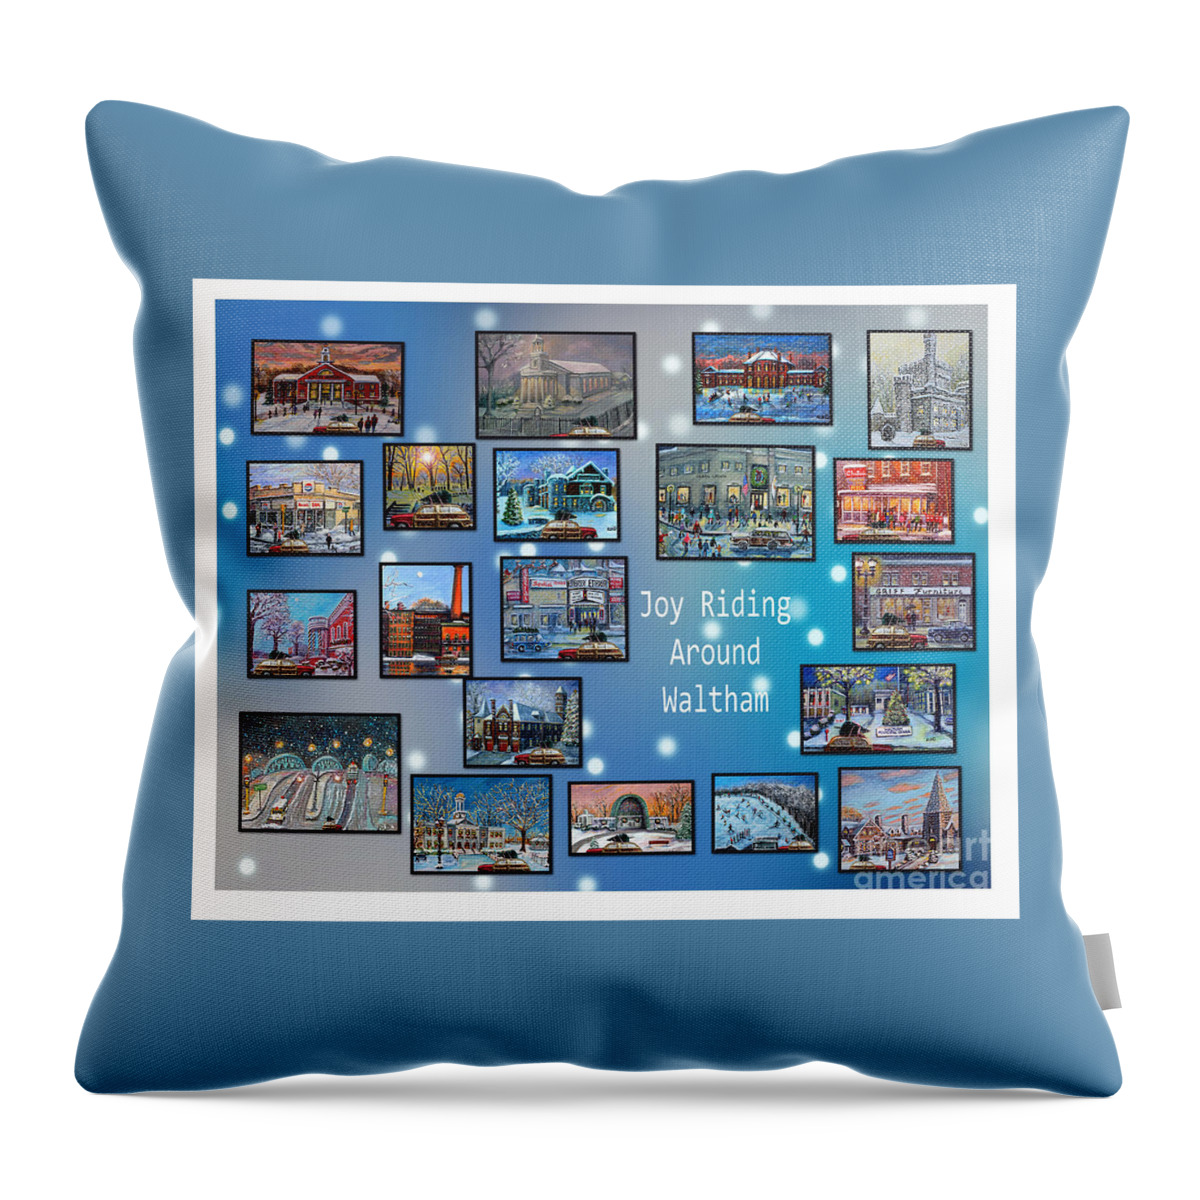 Waltham Throw Pillow featuring the painting Joy Riding Around Waltham by Rita Brown